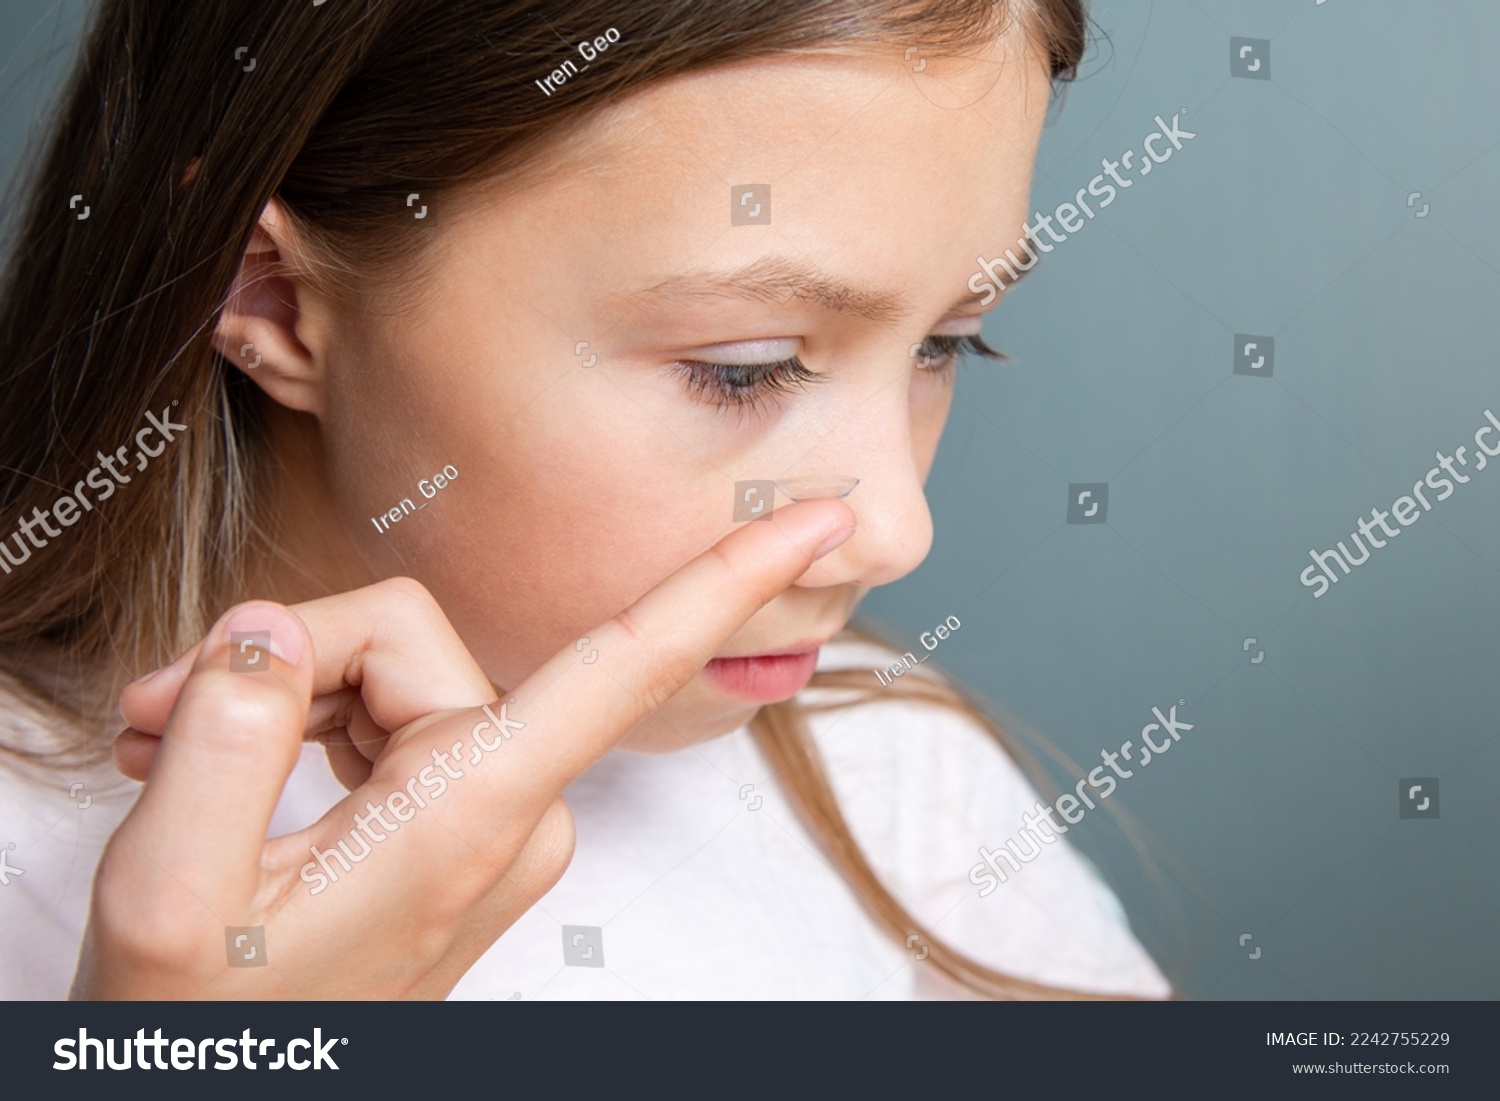 Little child girl inserting a transparent contact lens into her eye on gray background. The concept of ophthalmological poor sight correction #2242755229